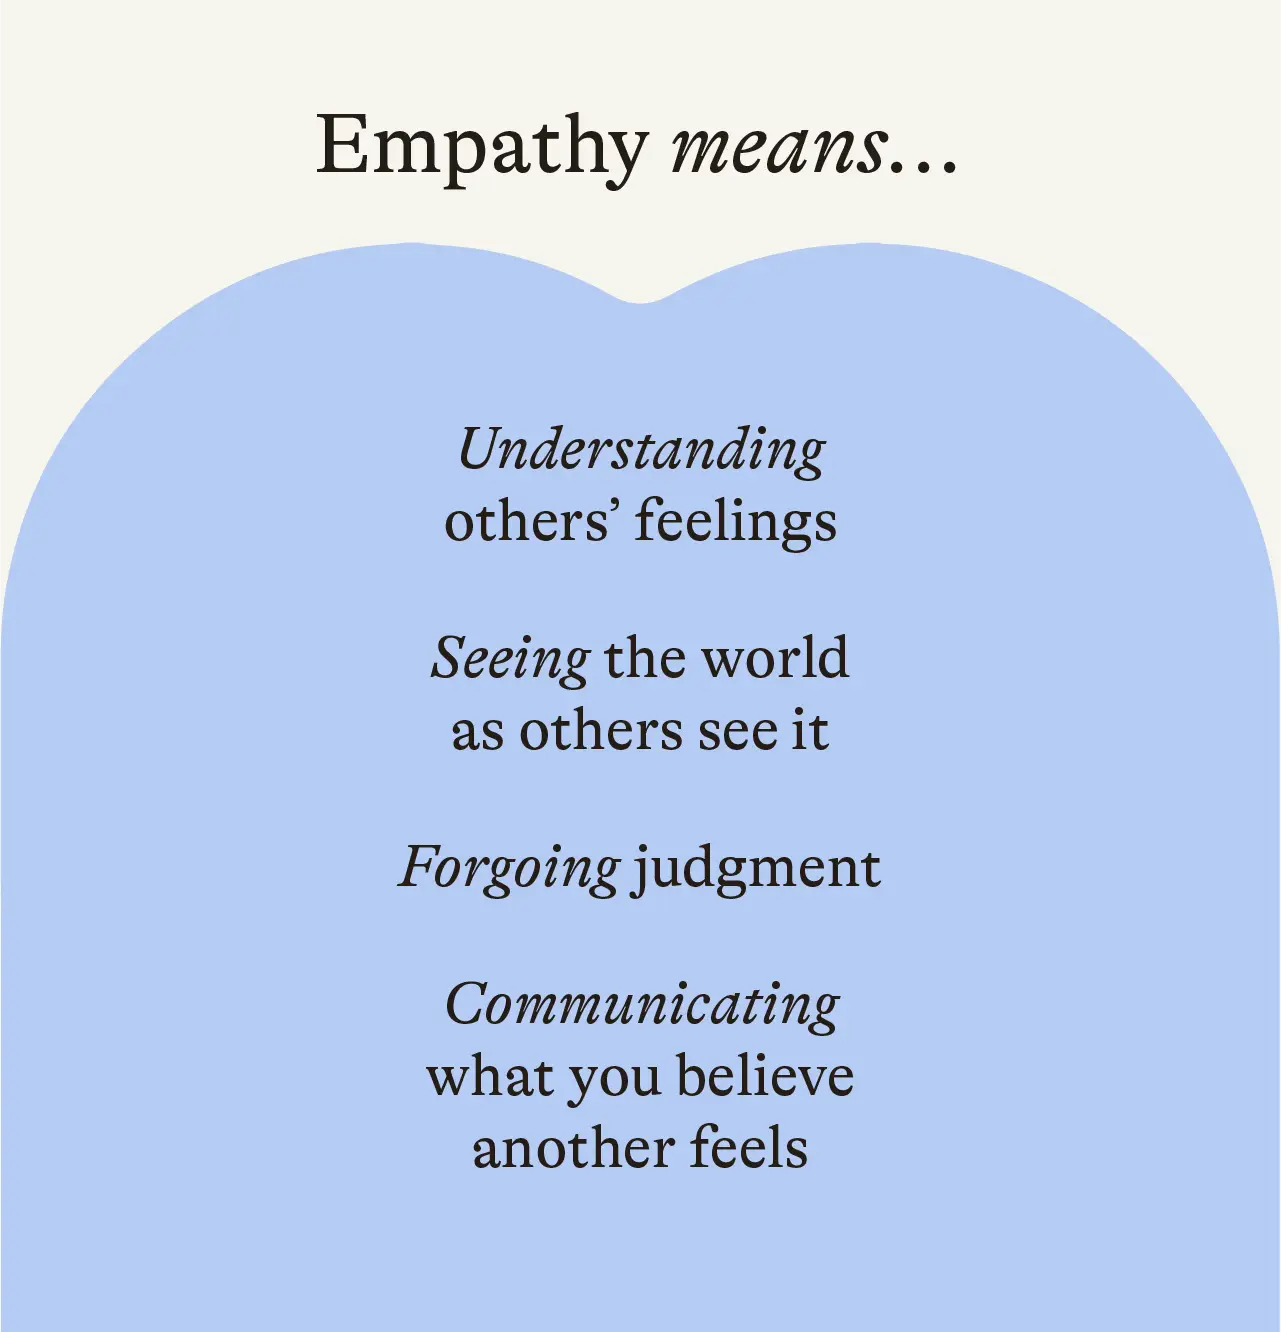 Empathy means... understanding others' feelings, seeing the world as others see it, forgoing judgment, communicating what you believe another feels